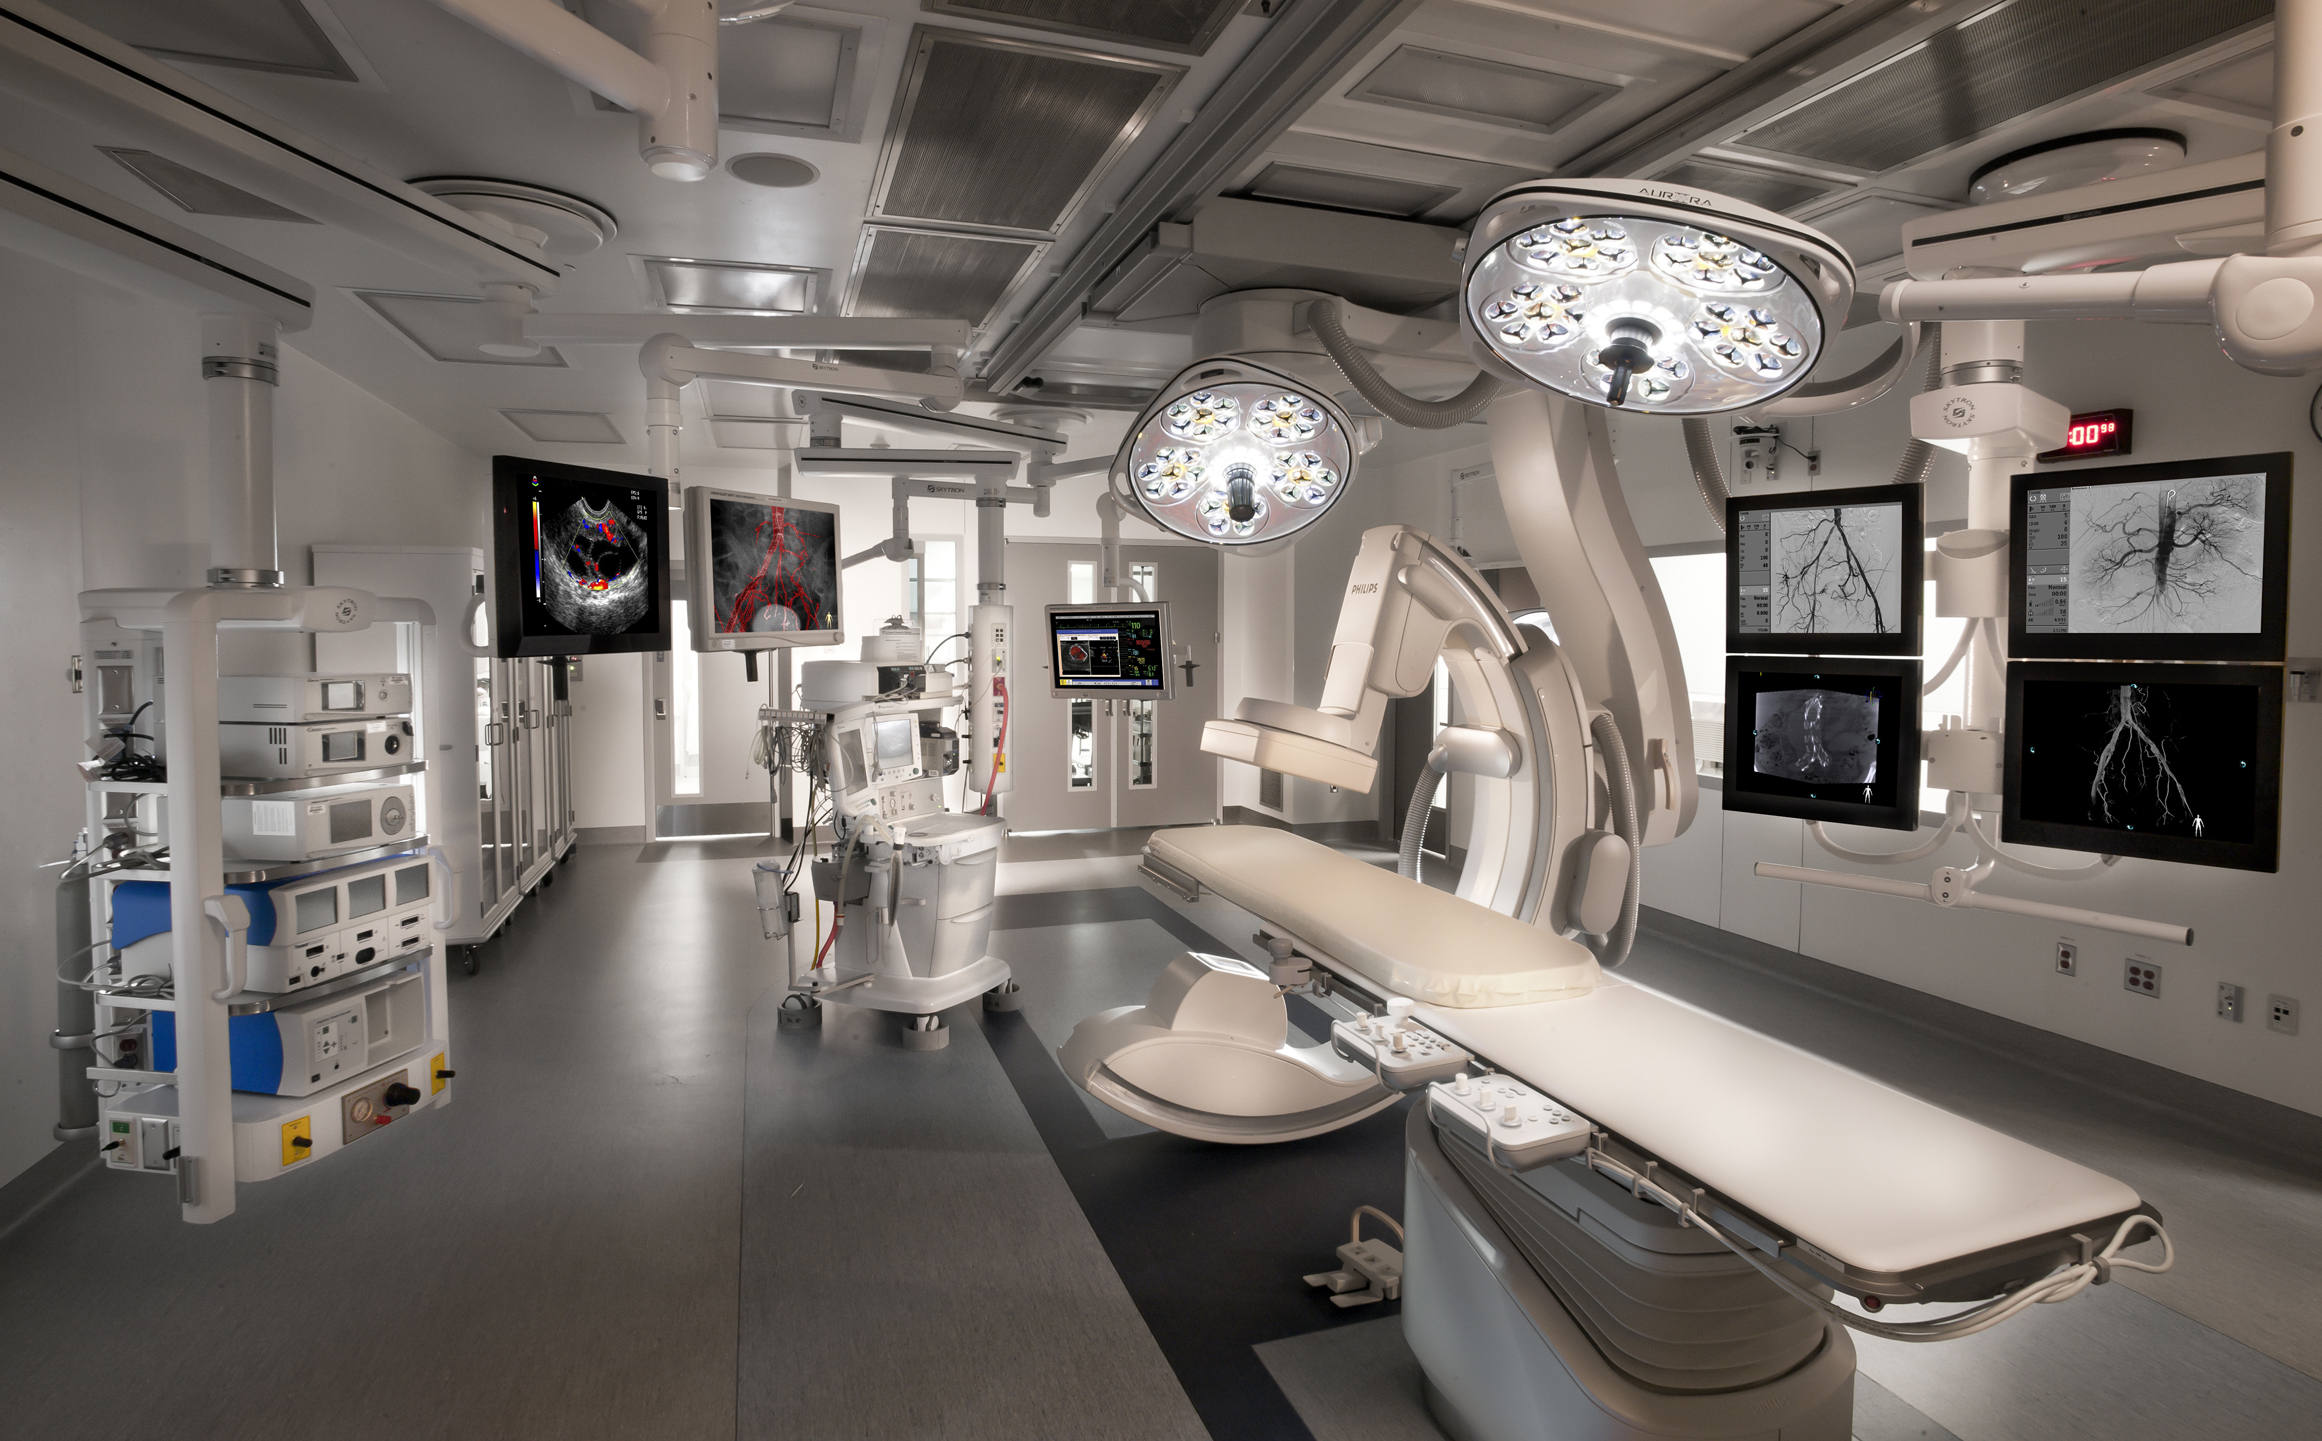 Hybrid-OR-Operating-Room-Philips-FD20-Ceiling-Skytron-LED-Surgical-Lights-Dual-Cockpit-RCH-1.jpg